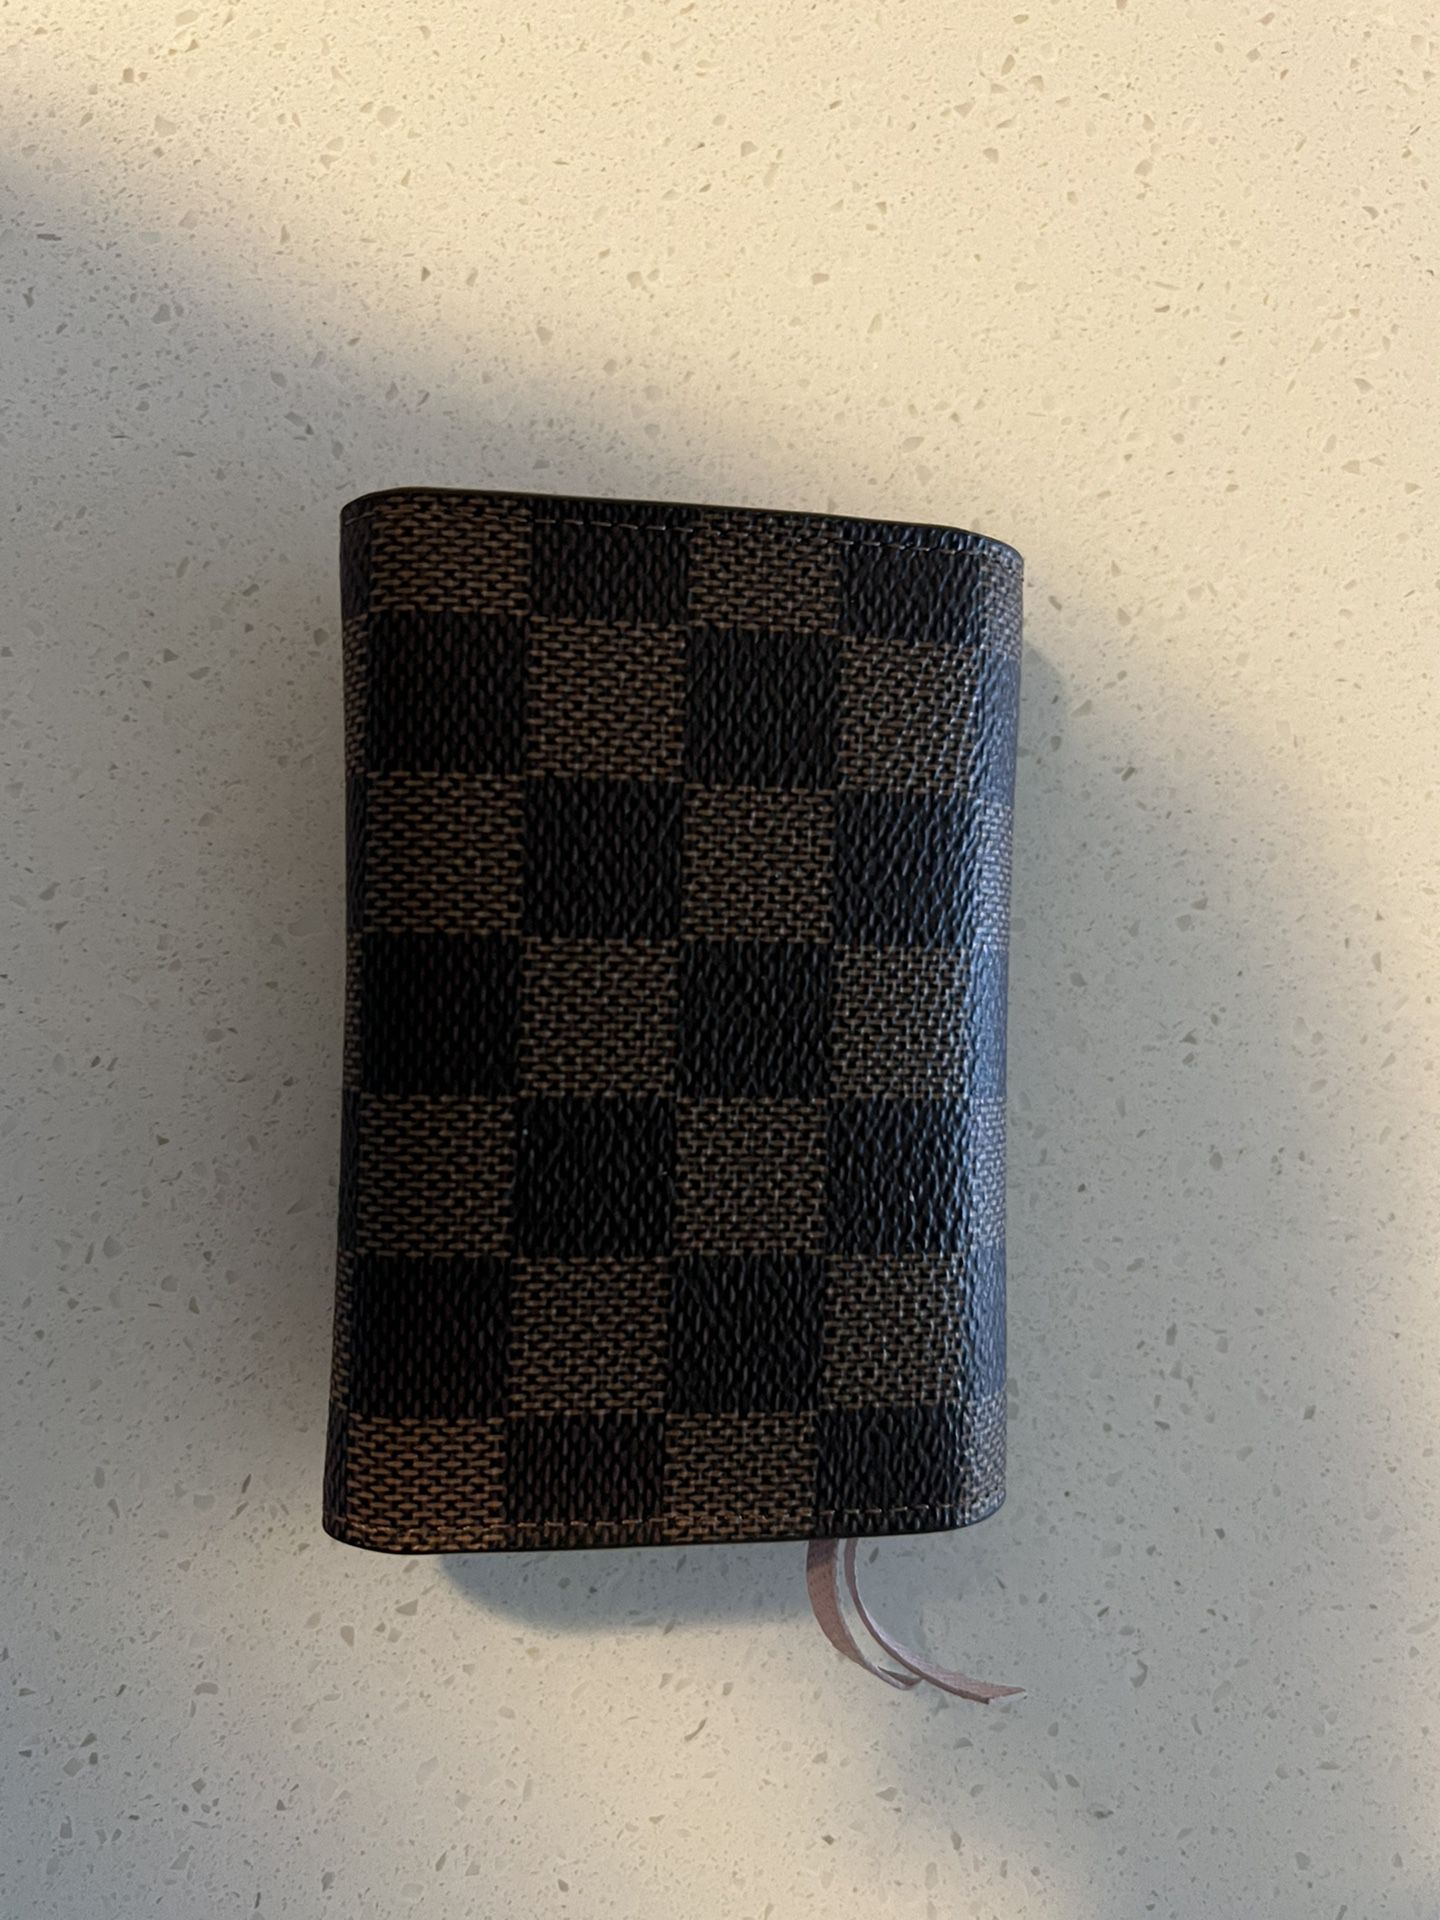 Authentic Louis Vuitton wallet. Used for Sale in Rancho Palos Verdes, CA -  OfferUp